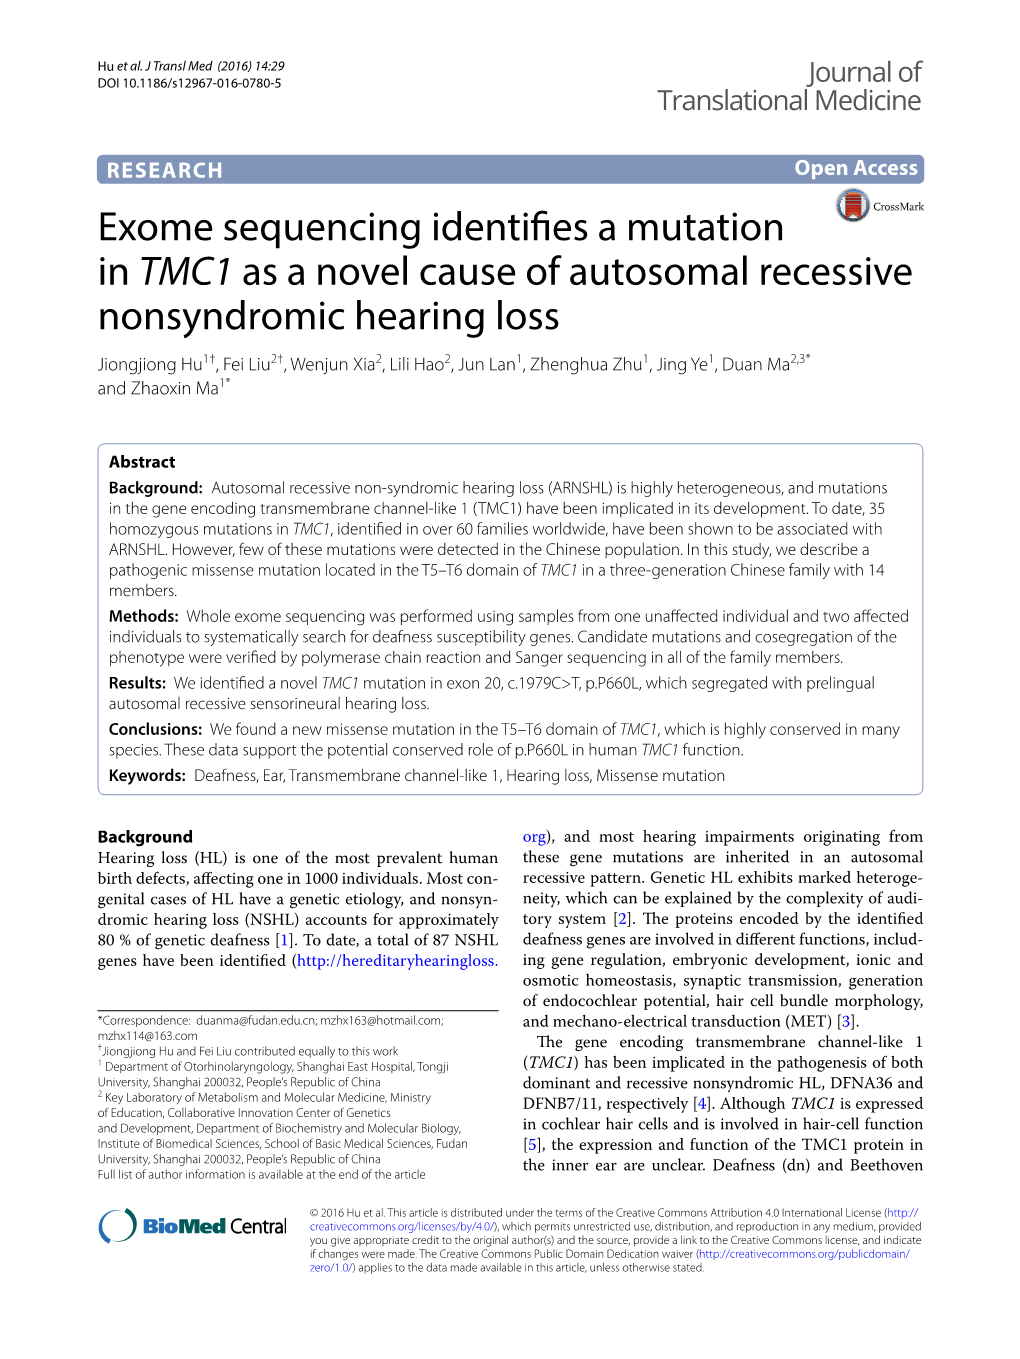 Exome Sequencing Identifies a Mutation in TMC1 As a Novel Cause